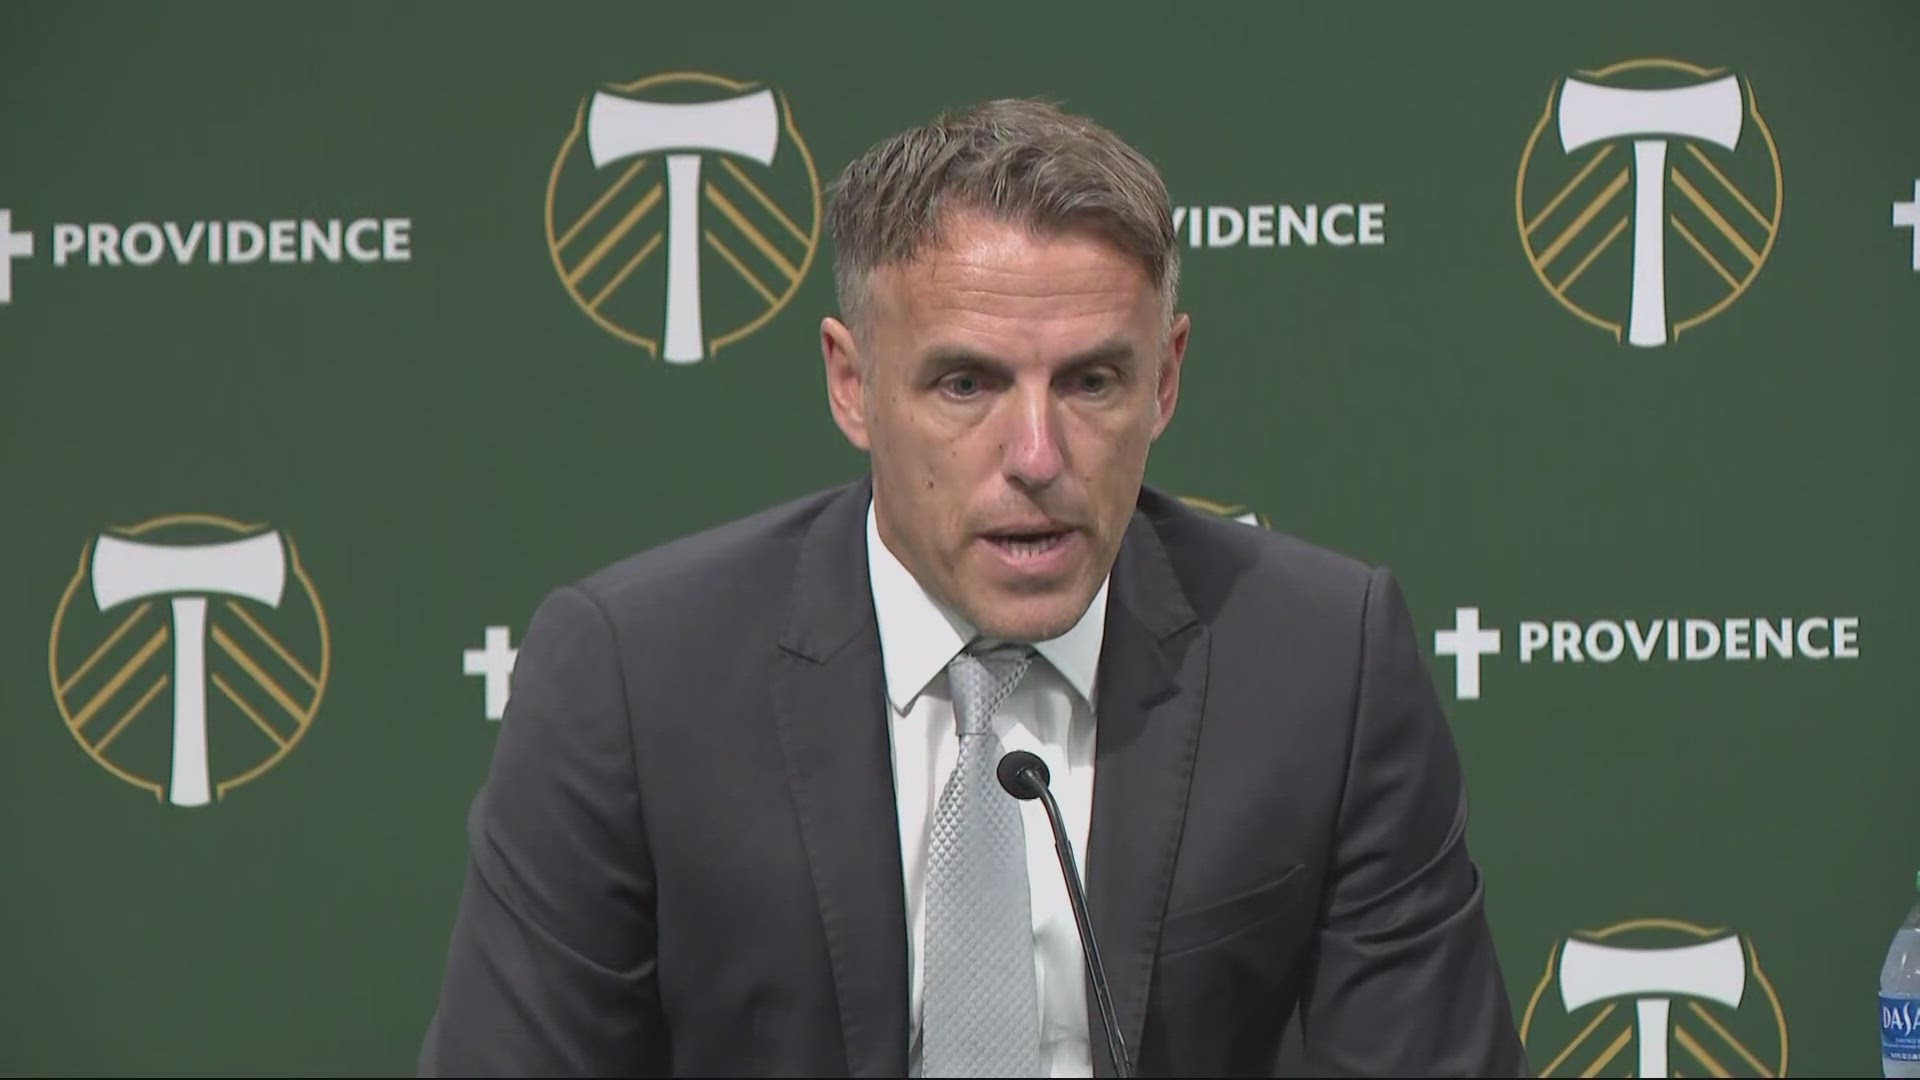 Neville’s hiring has drawn sharp criticism from many fans both for his record in Miami and his history of sexist social media posts. He is the Timbers’ fourth coach.